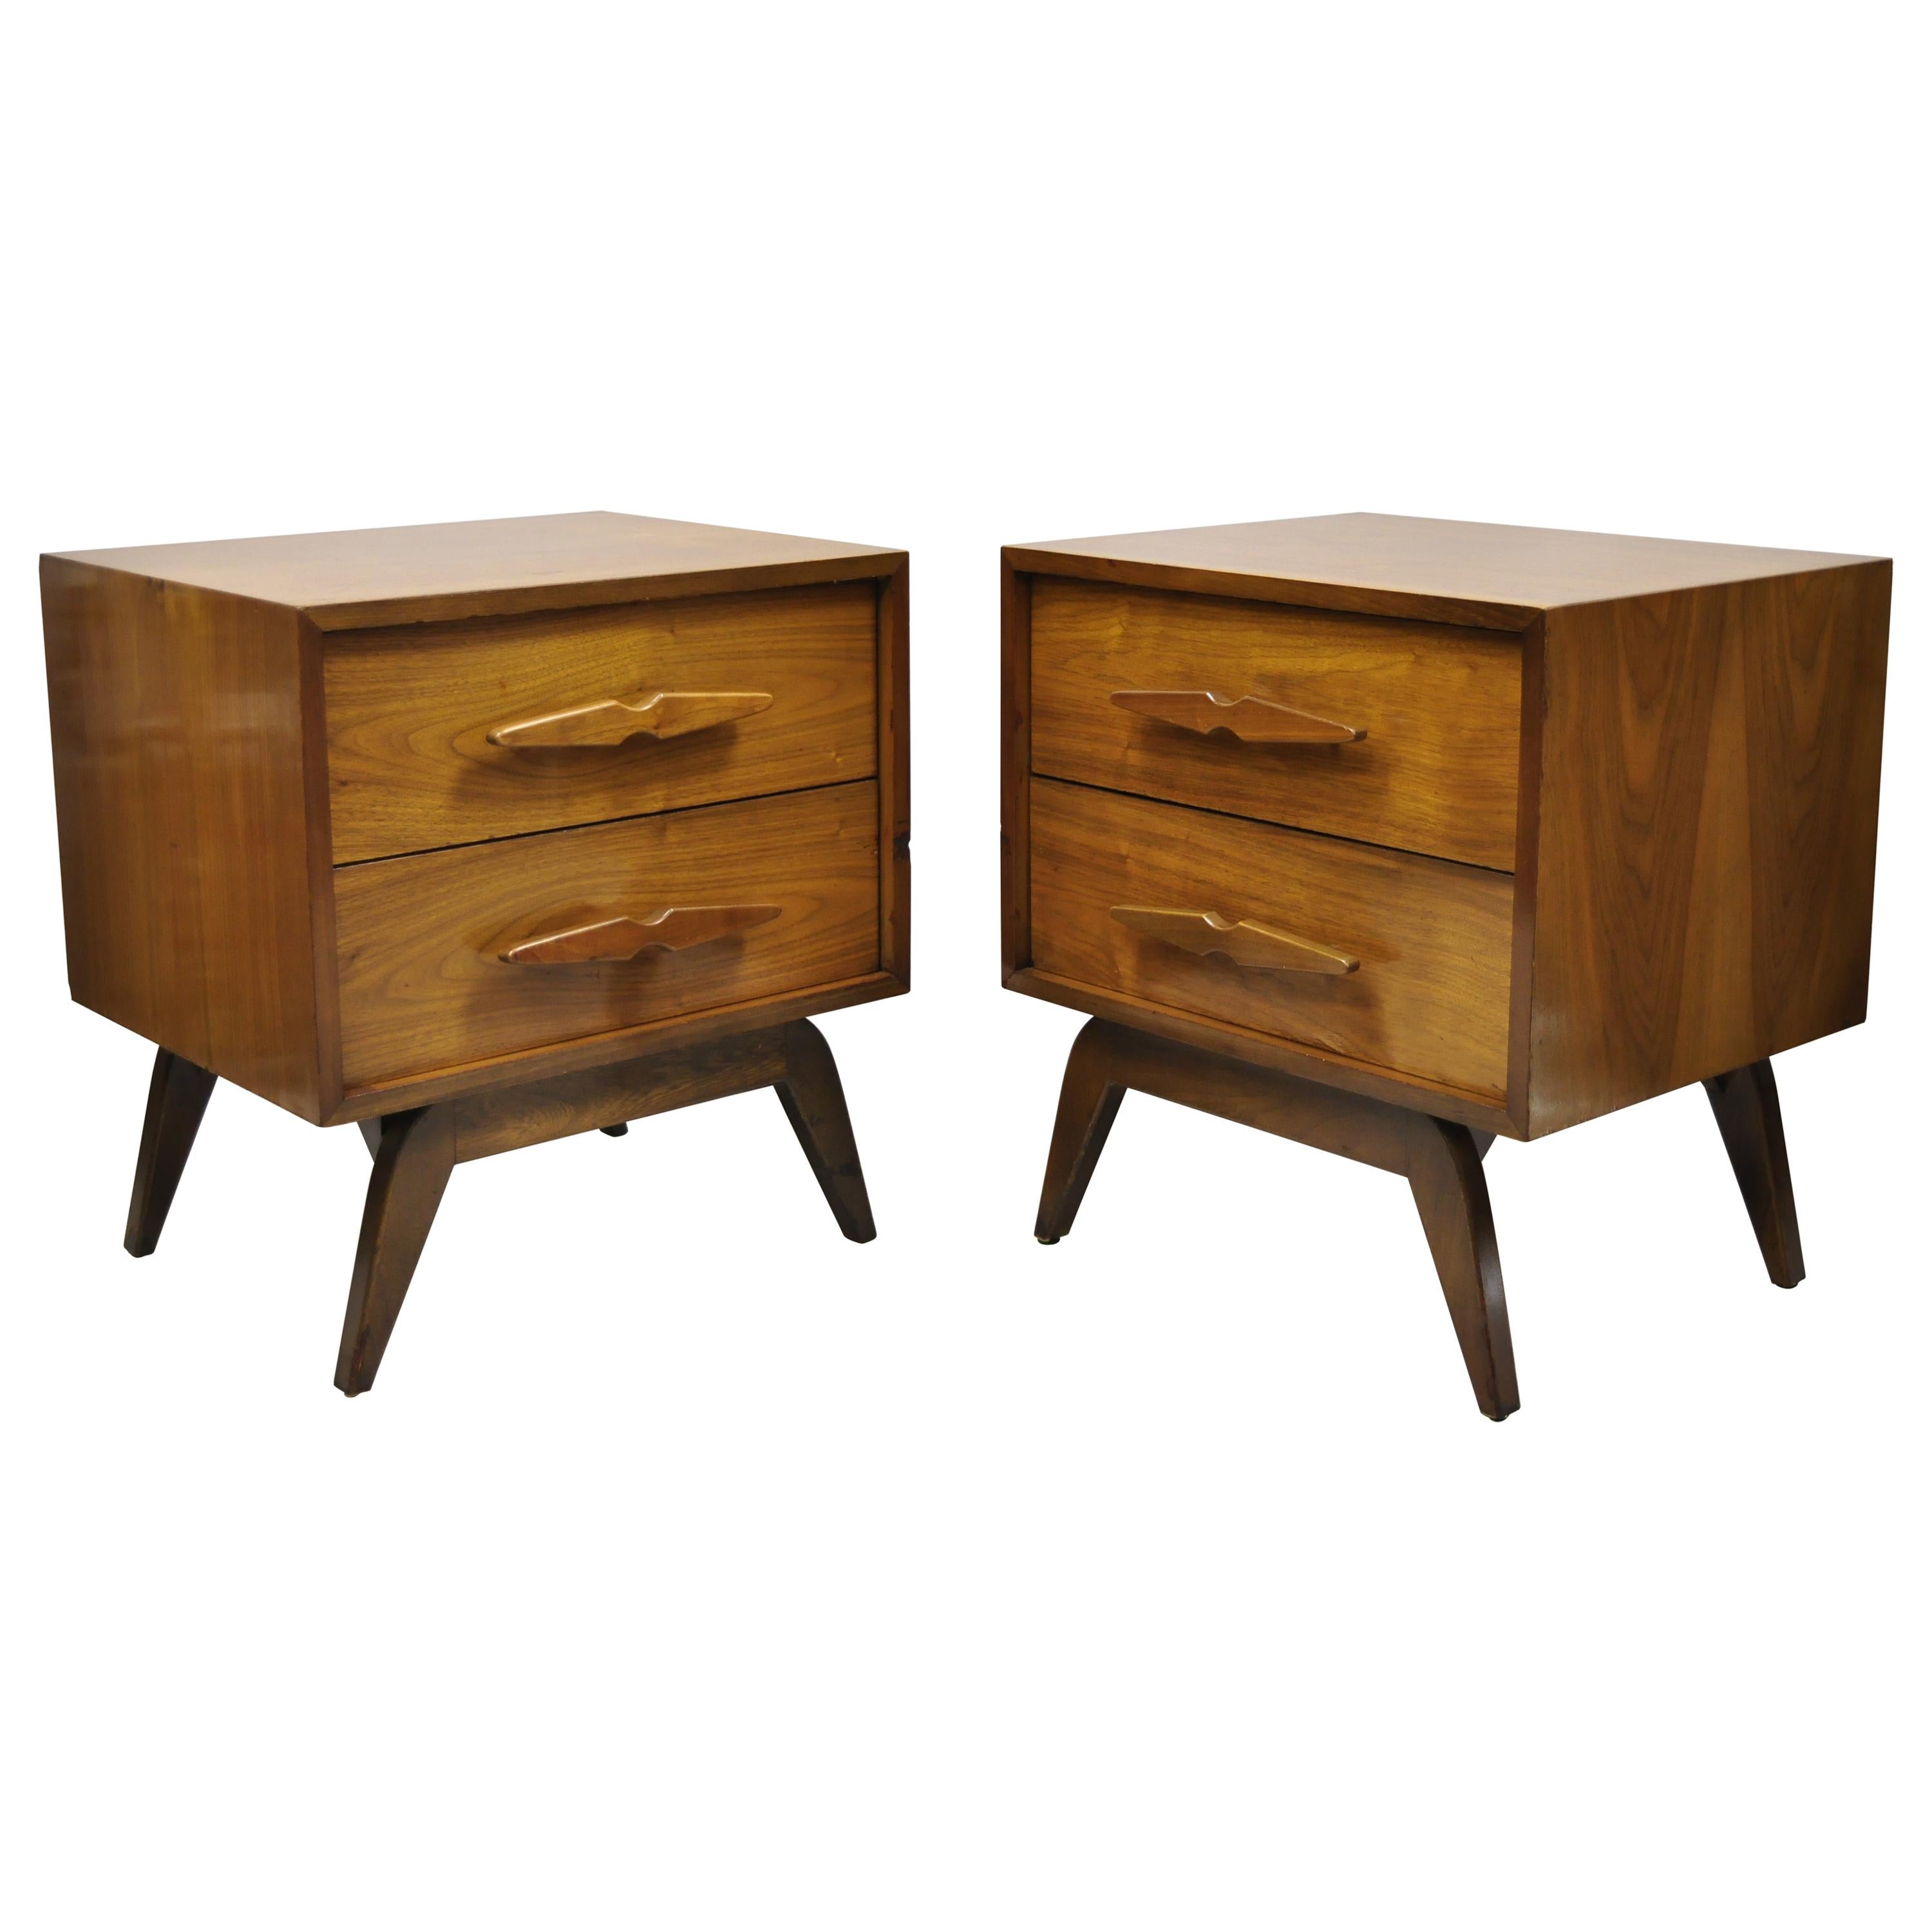 Mid-Century Modern Sculpted Walnut Two-Drawer Nightstands Bedside Tables, Pair